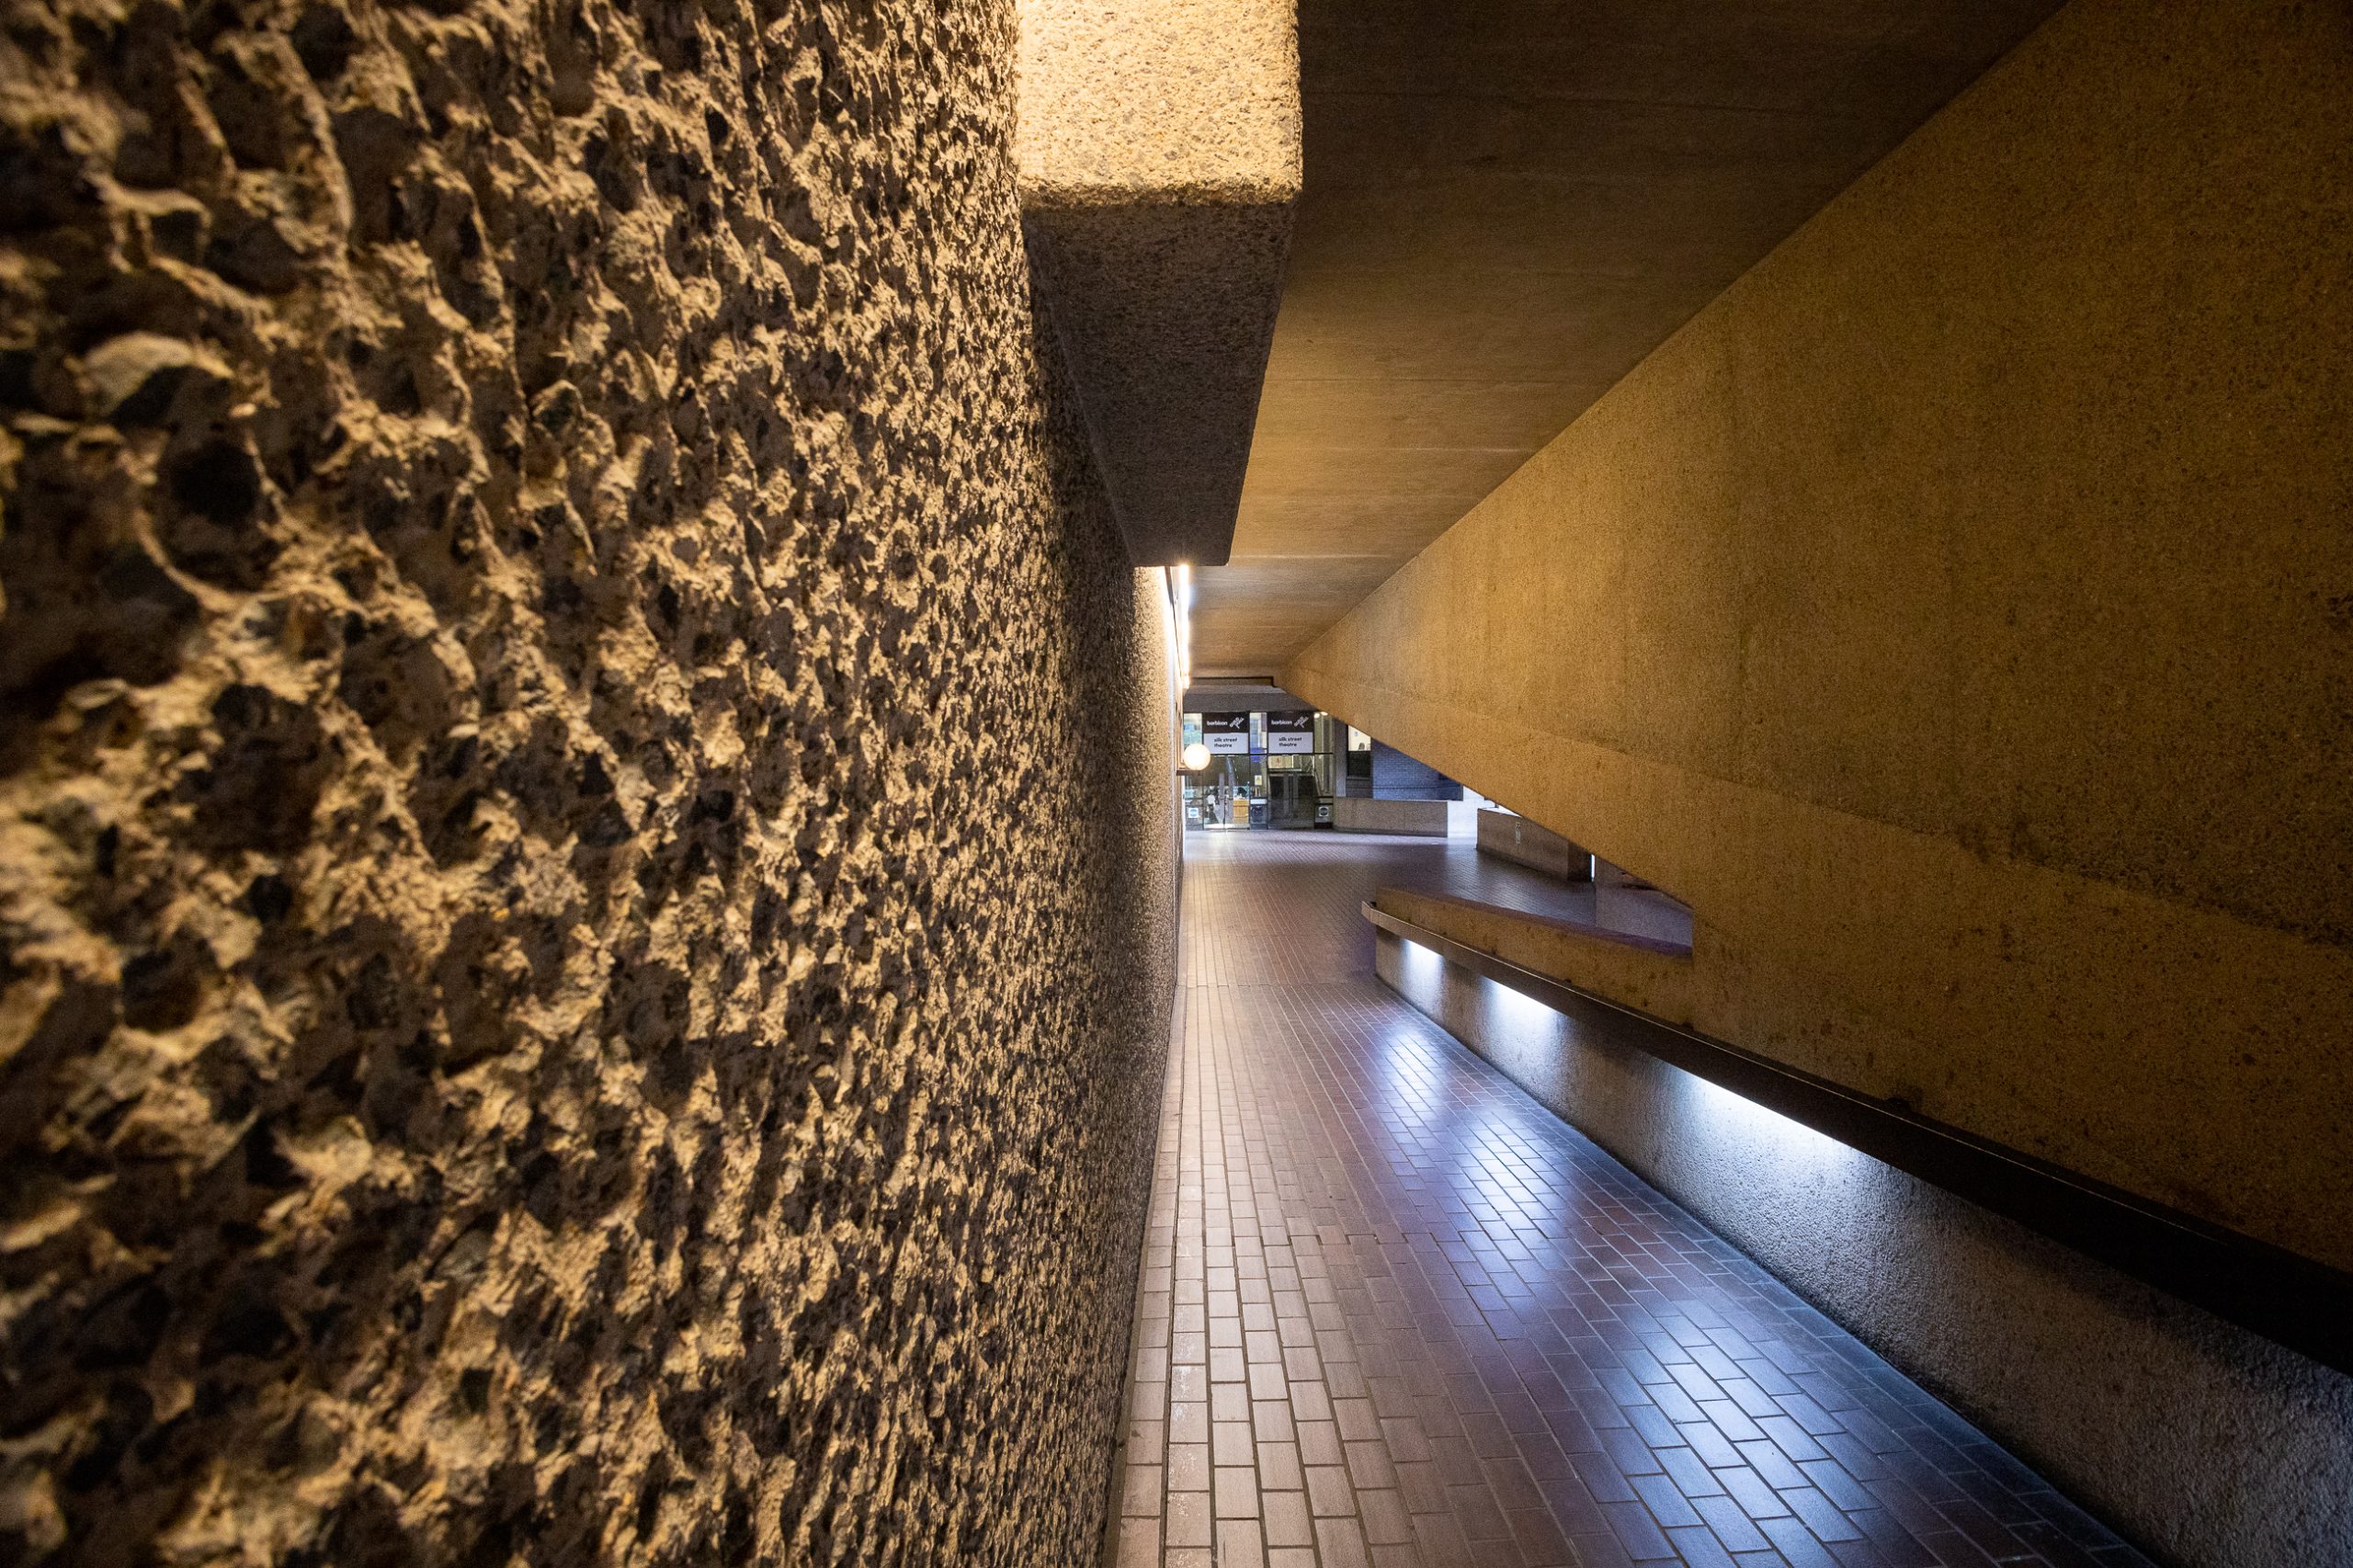 A downward-sloping interior corridor showing details of the wall texture on the left